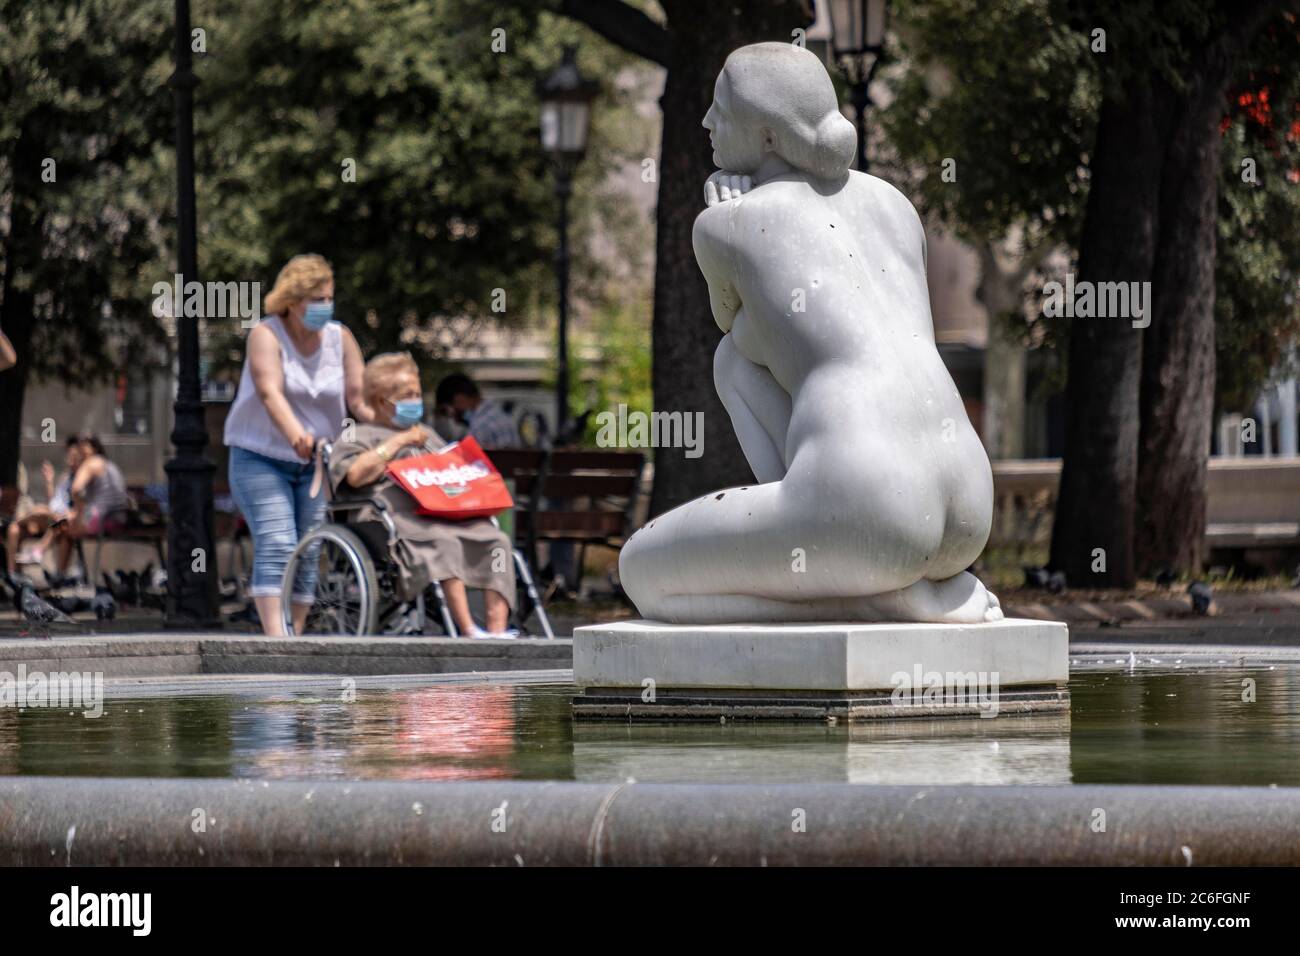 Two people seen next to the sculpture La Diosa by the sculptor Josep Clarà i Ayats in Plaza Catalunya while wearing face masks as a precaution against the spread of the coronavirus during the pandemic.Catalonia will fine whoever does not wear a sanitary mask in public space with 100 euros, as a measure due to the Covid-19 outbreak. Stock Photo